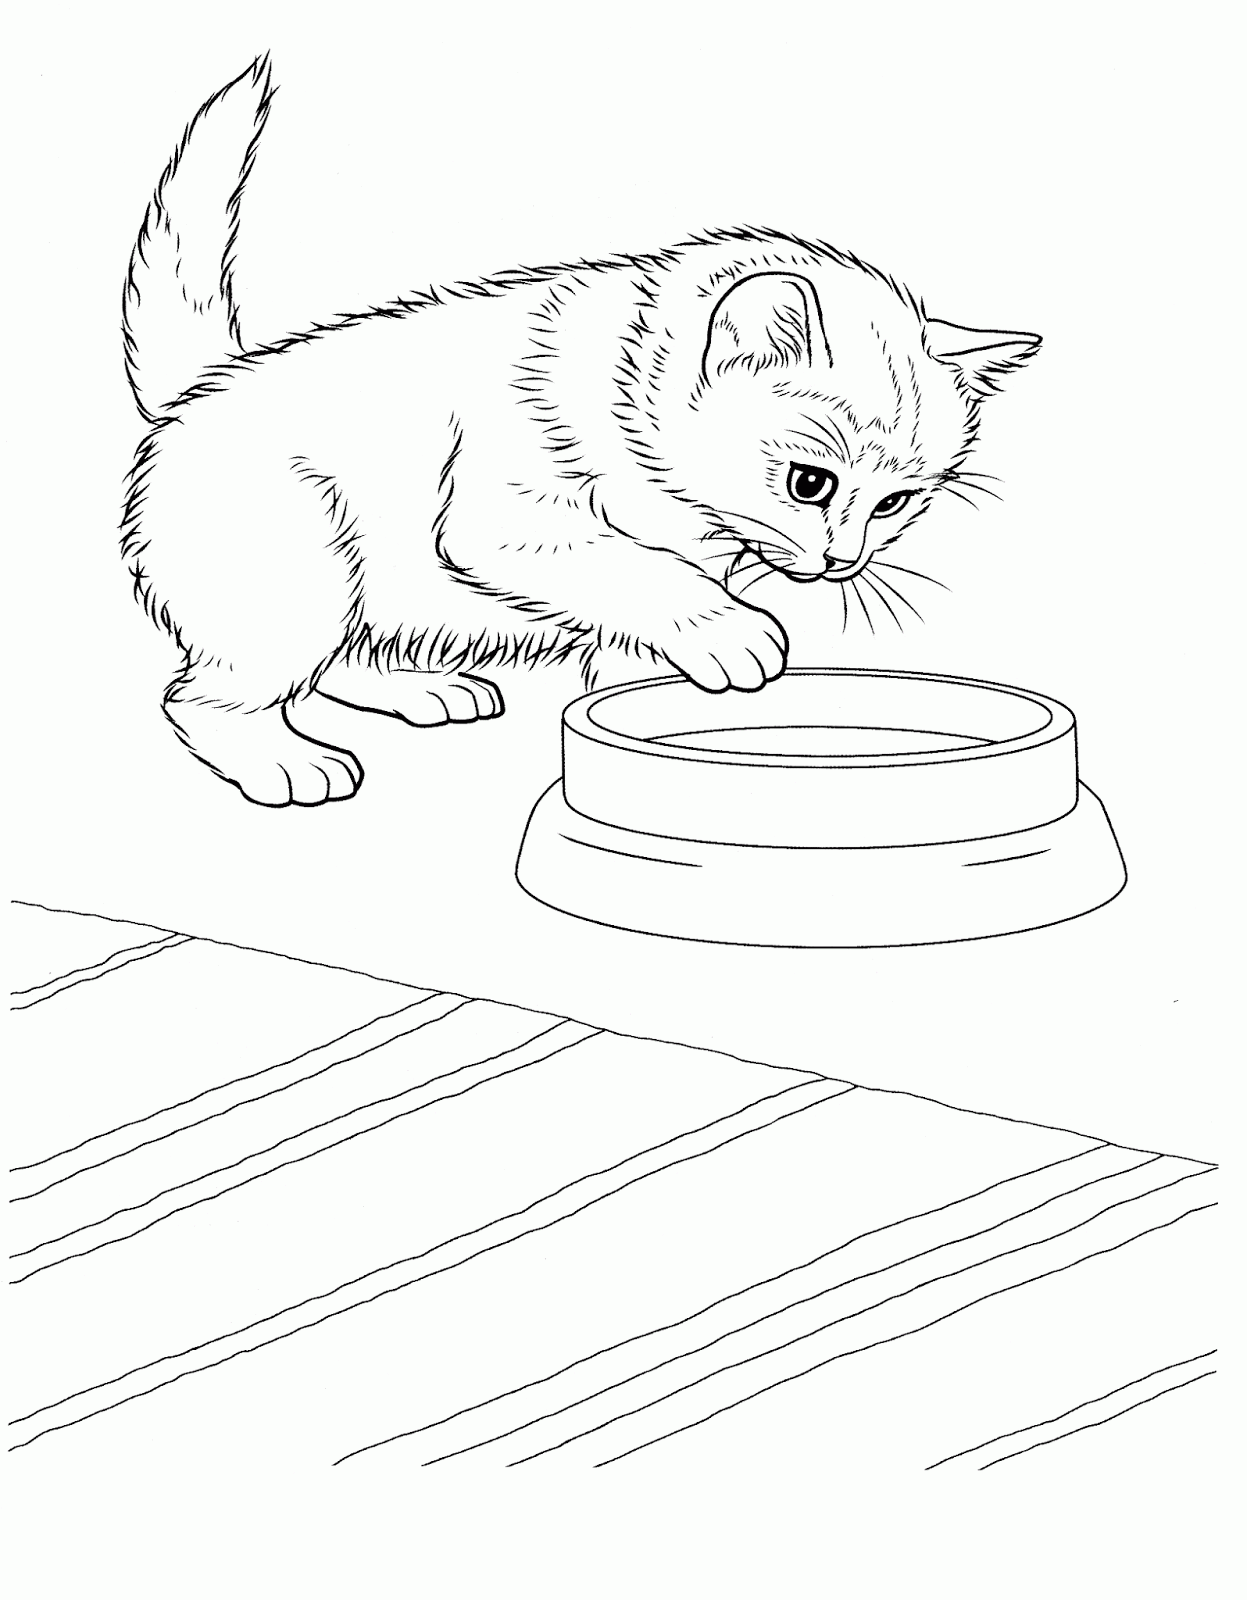 Coloring Pages: Cats and Kittens Coloring Pages Free and Printable